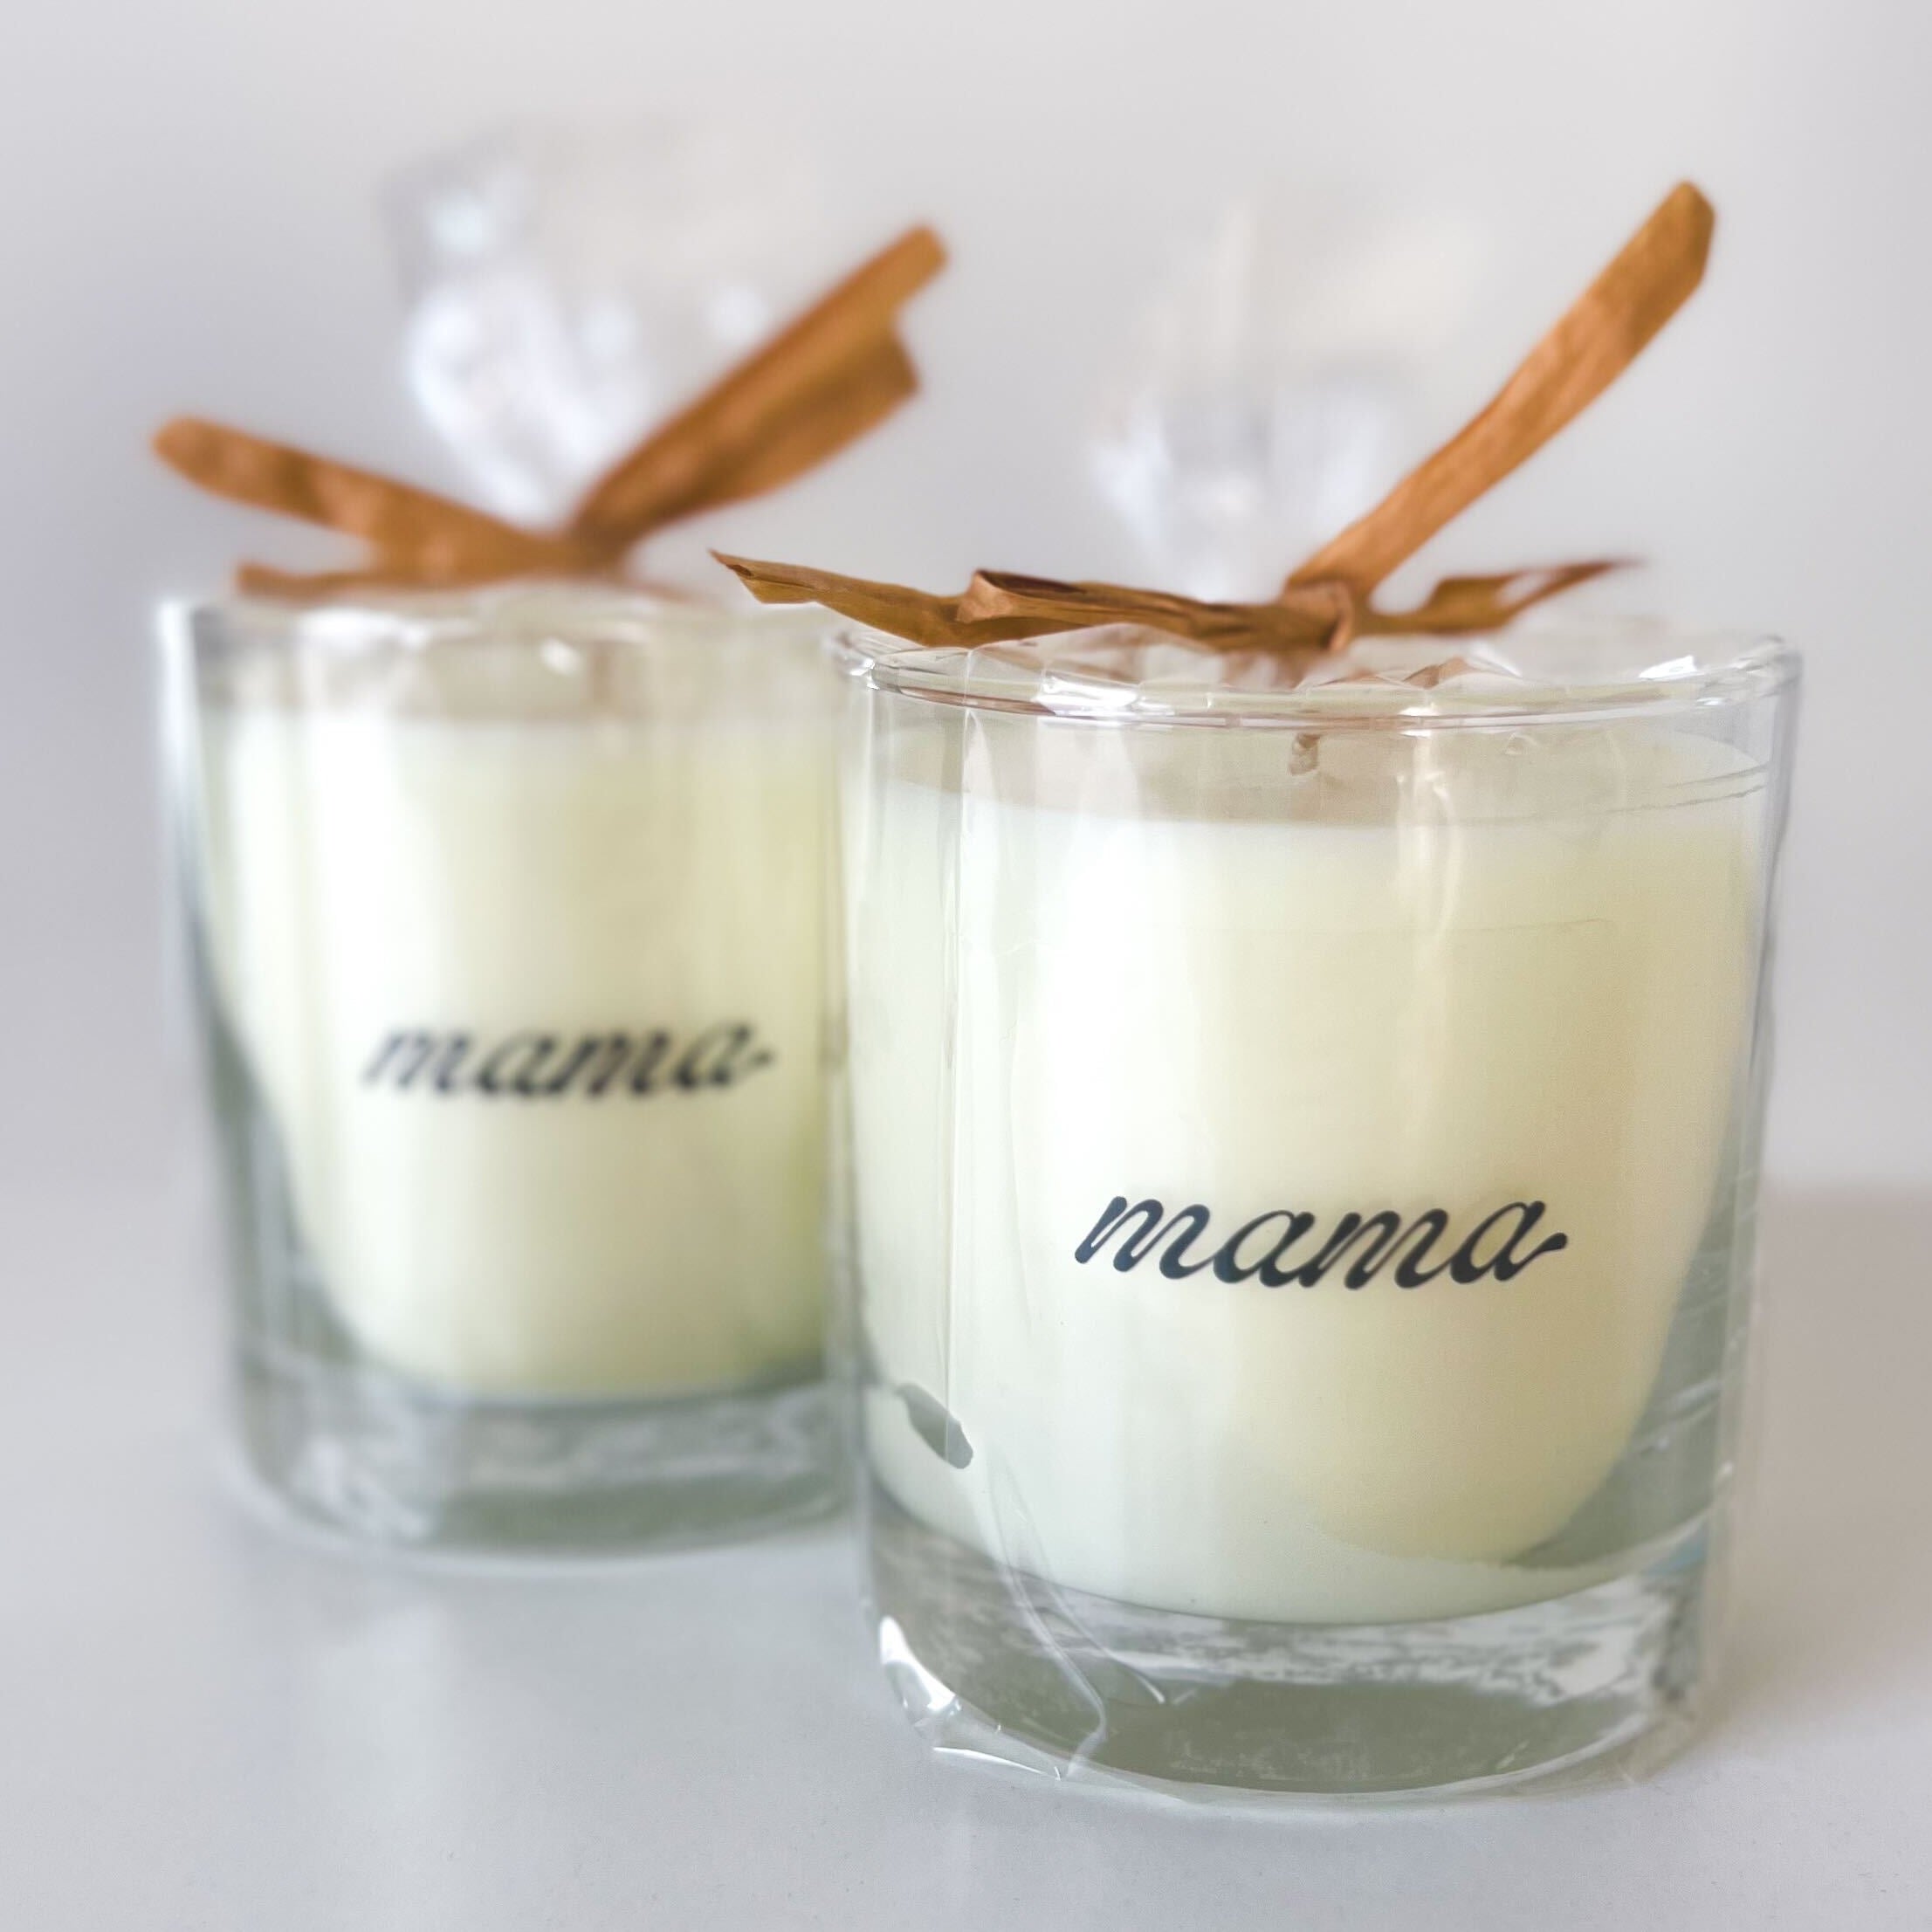 2 candles with 'mama' written on them